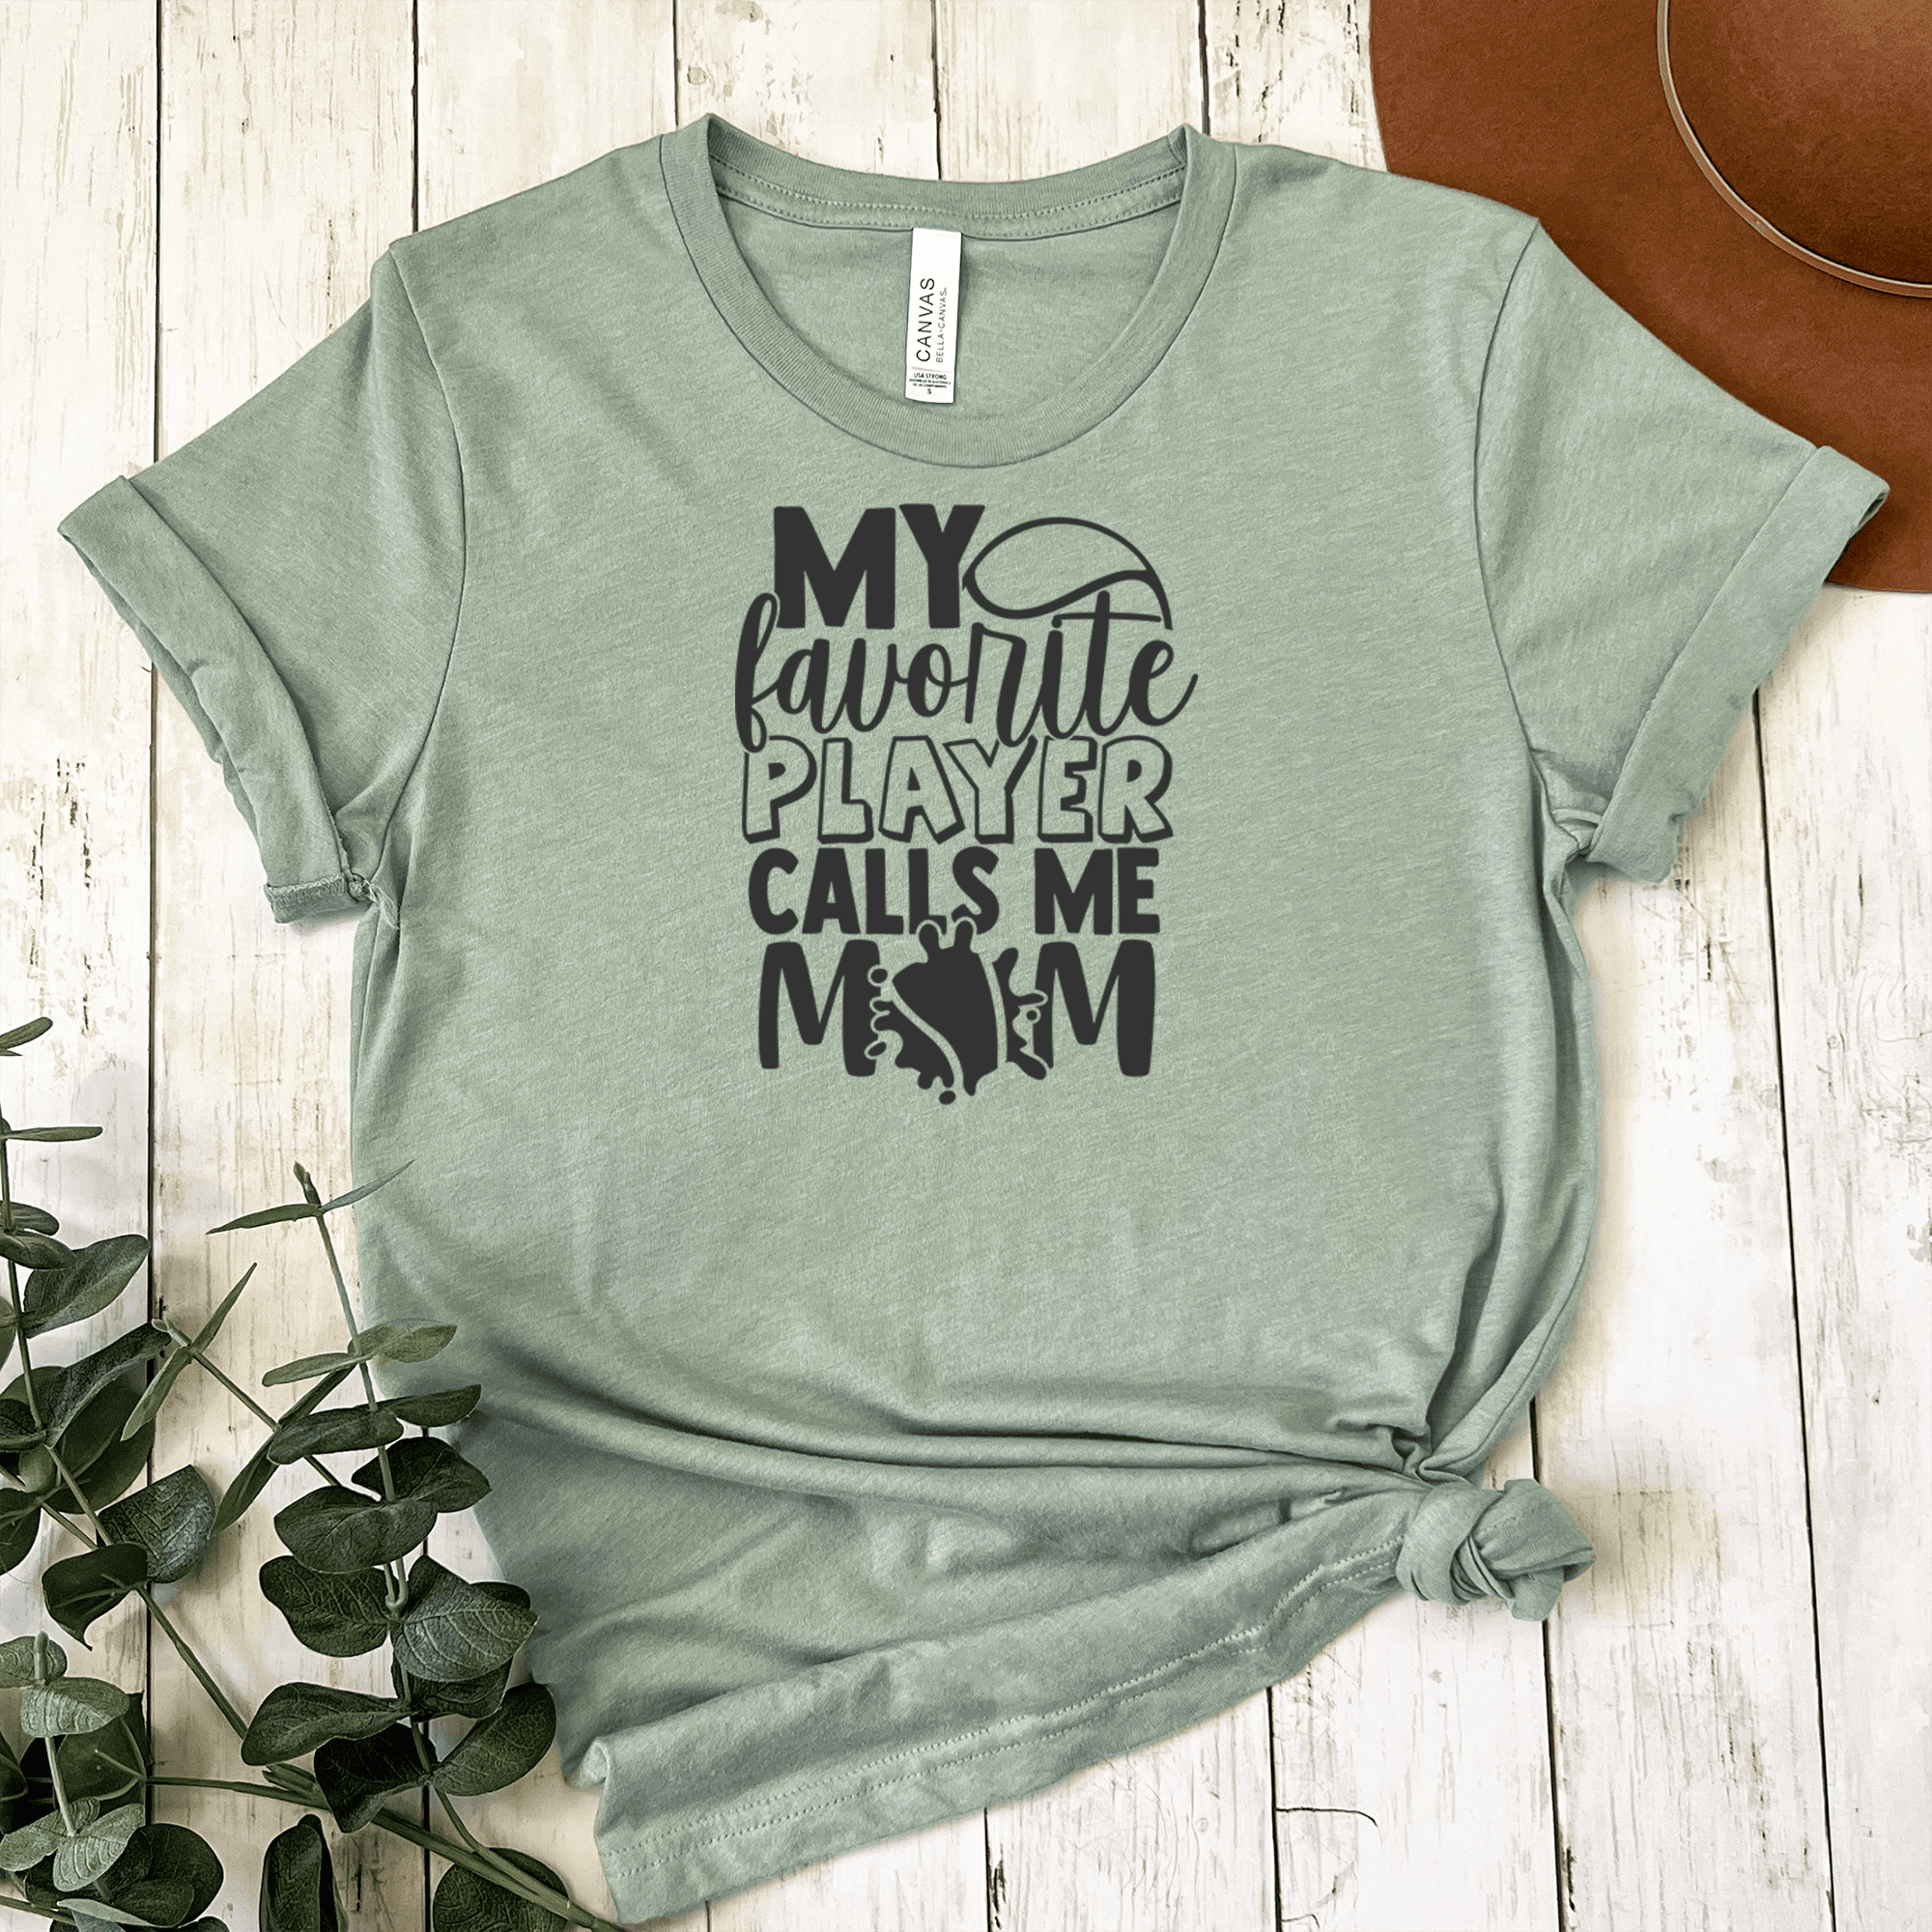 Womens Light Green T Shirt with That-Tennis-Player-Calls-Me-Mom design